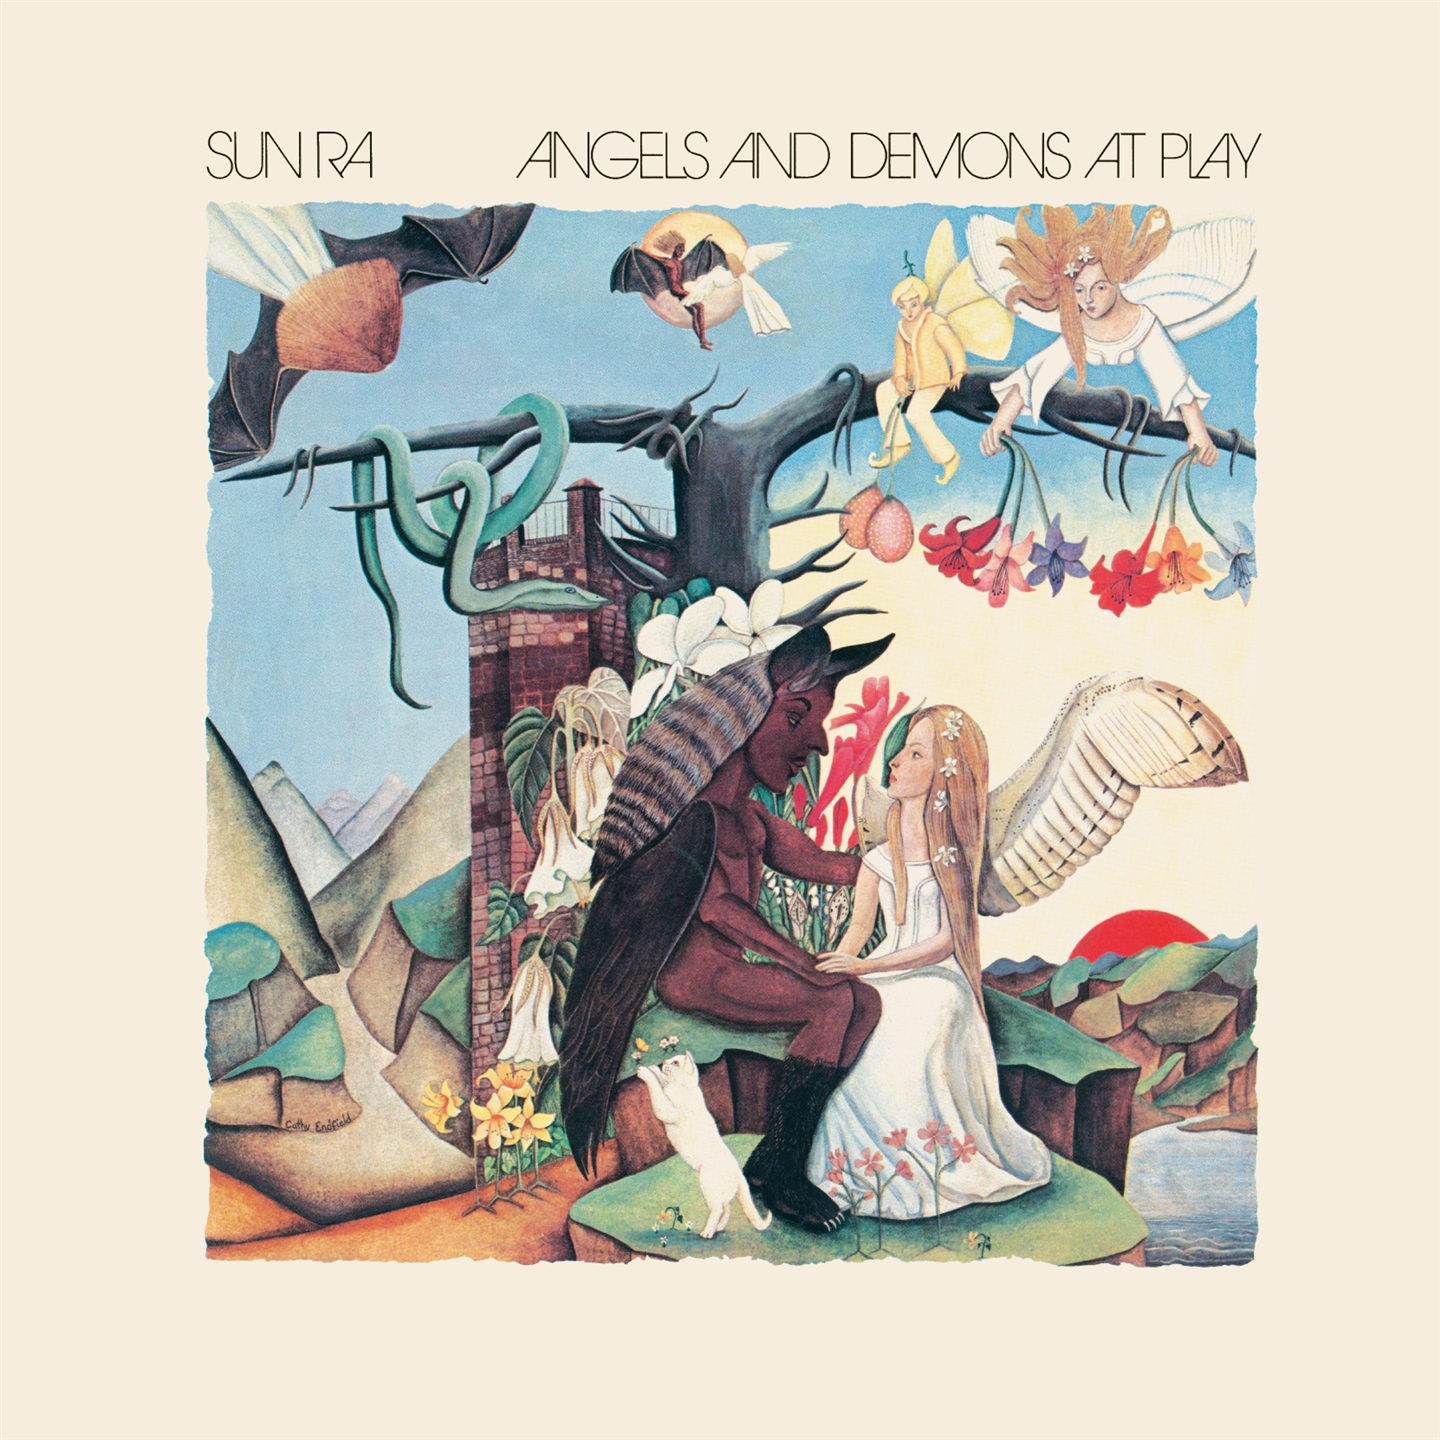 ANGELS AND DEMONS AT PLAY [LTD.ED. RED VINYL]